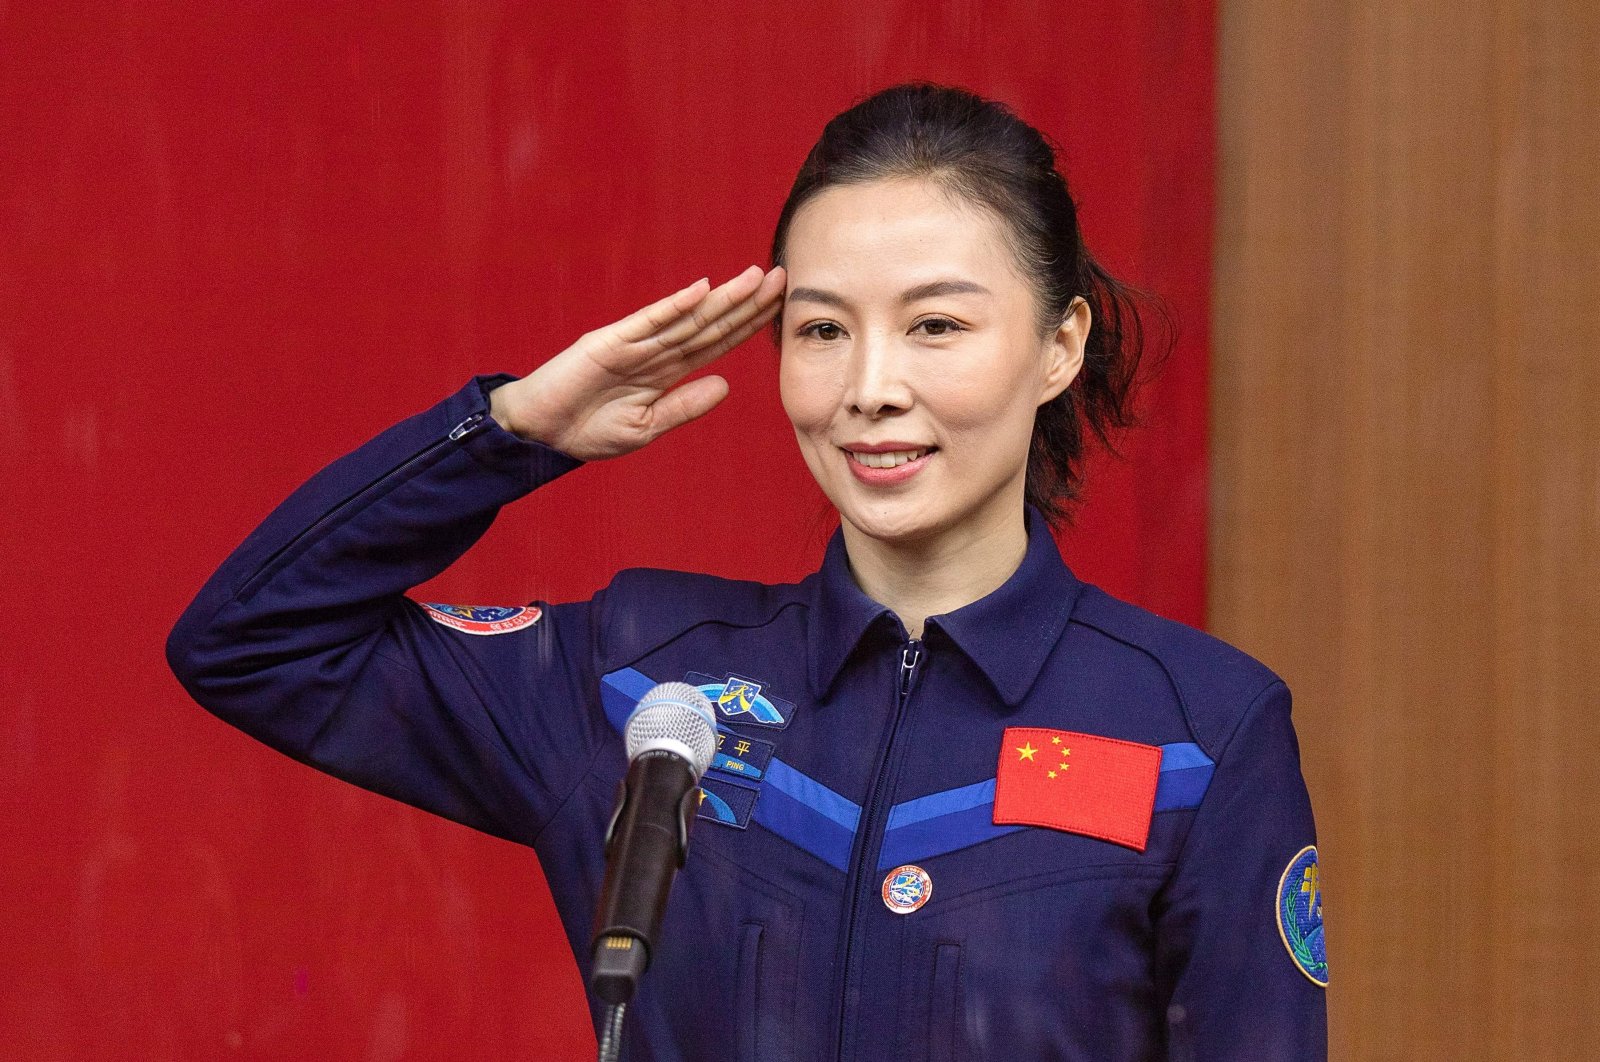 Chinese astronaut Wang Yaping, member of the second crew for China's new space station, salutes during a briefing the day before the launch at the Jiuquan Satellite Launch Center in the Gobi Desert, in northwest China, Oct. 14, 2021. (AFP Photo)